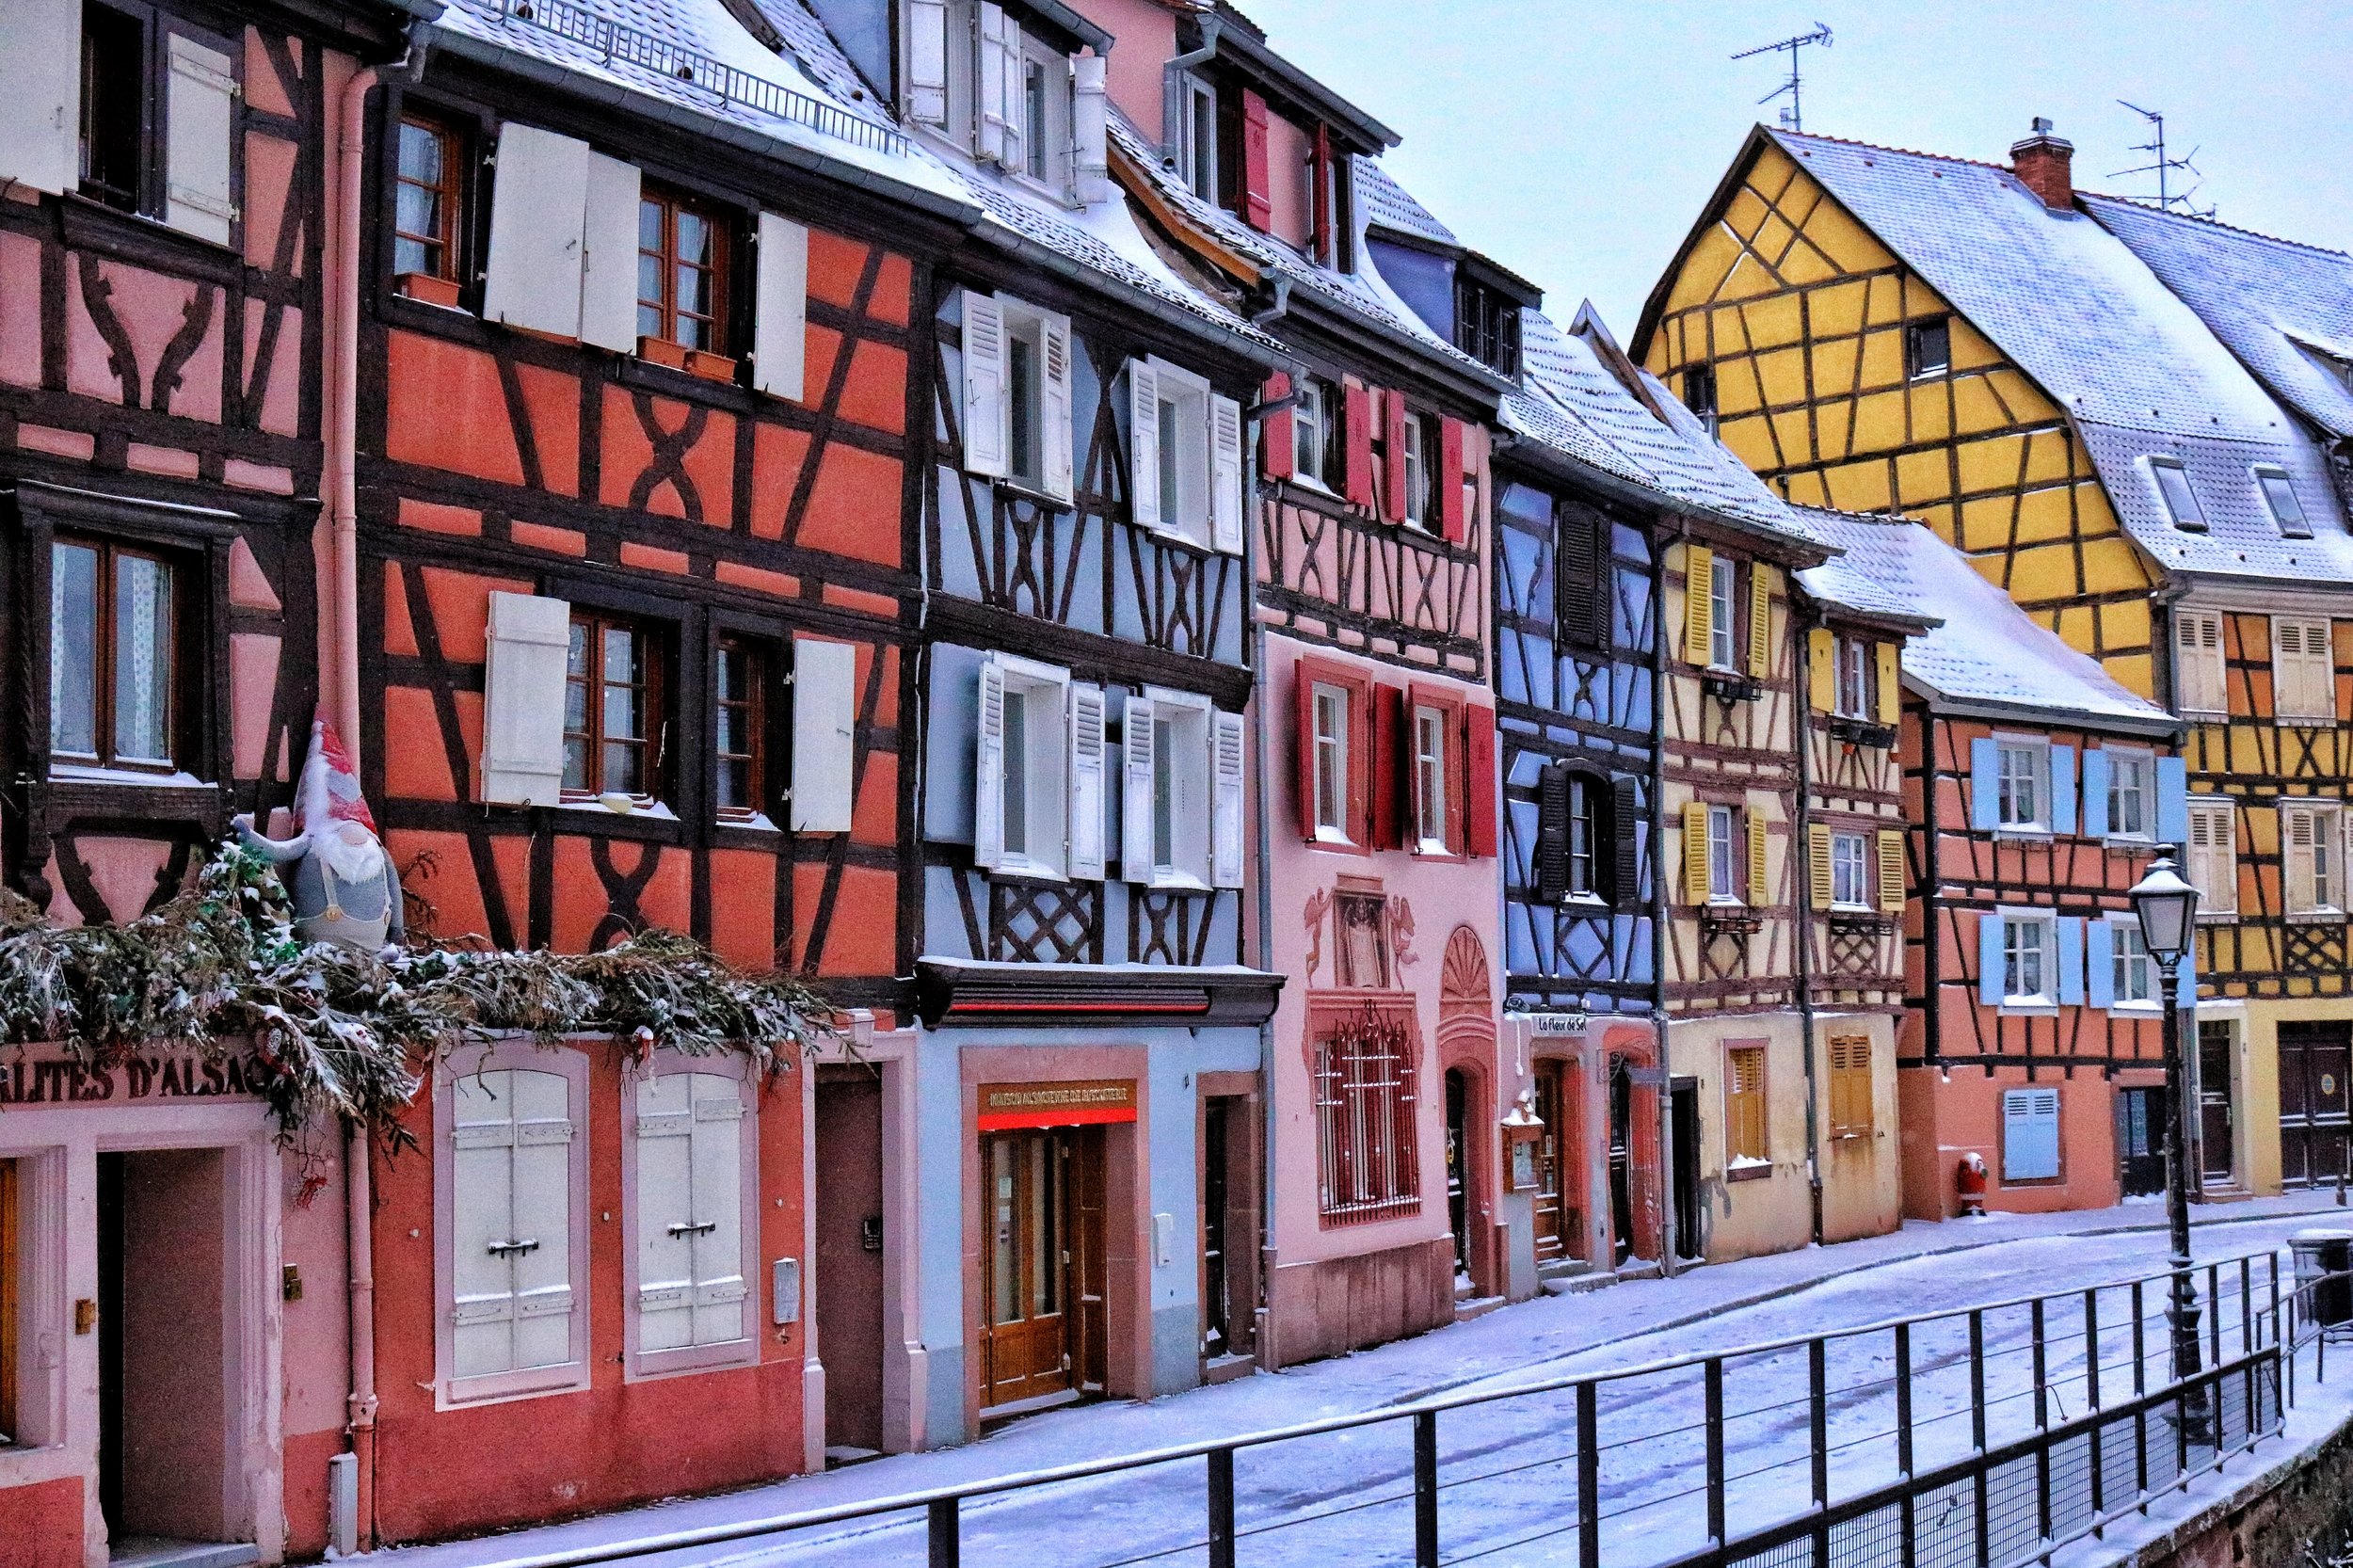 How to get to Colmar - 